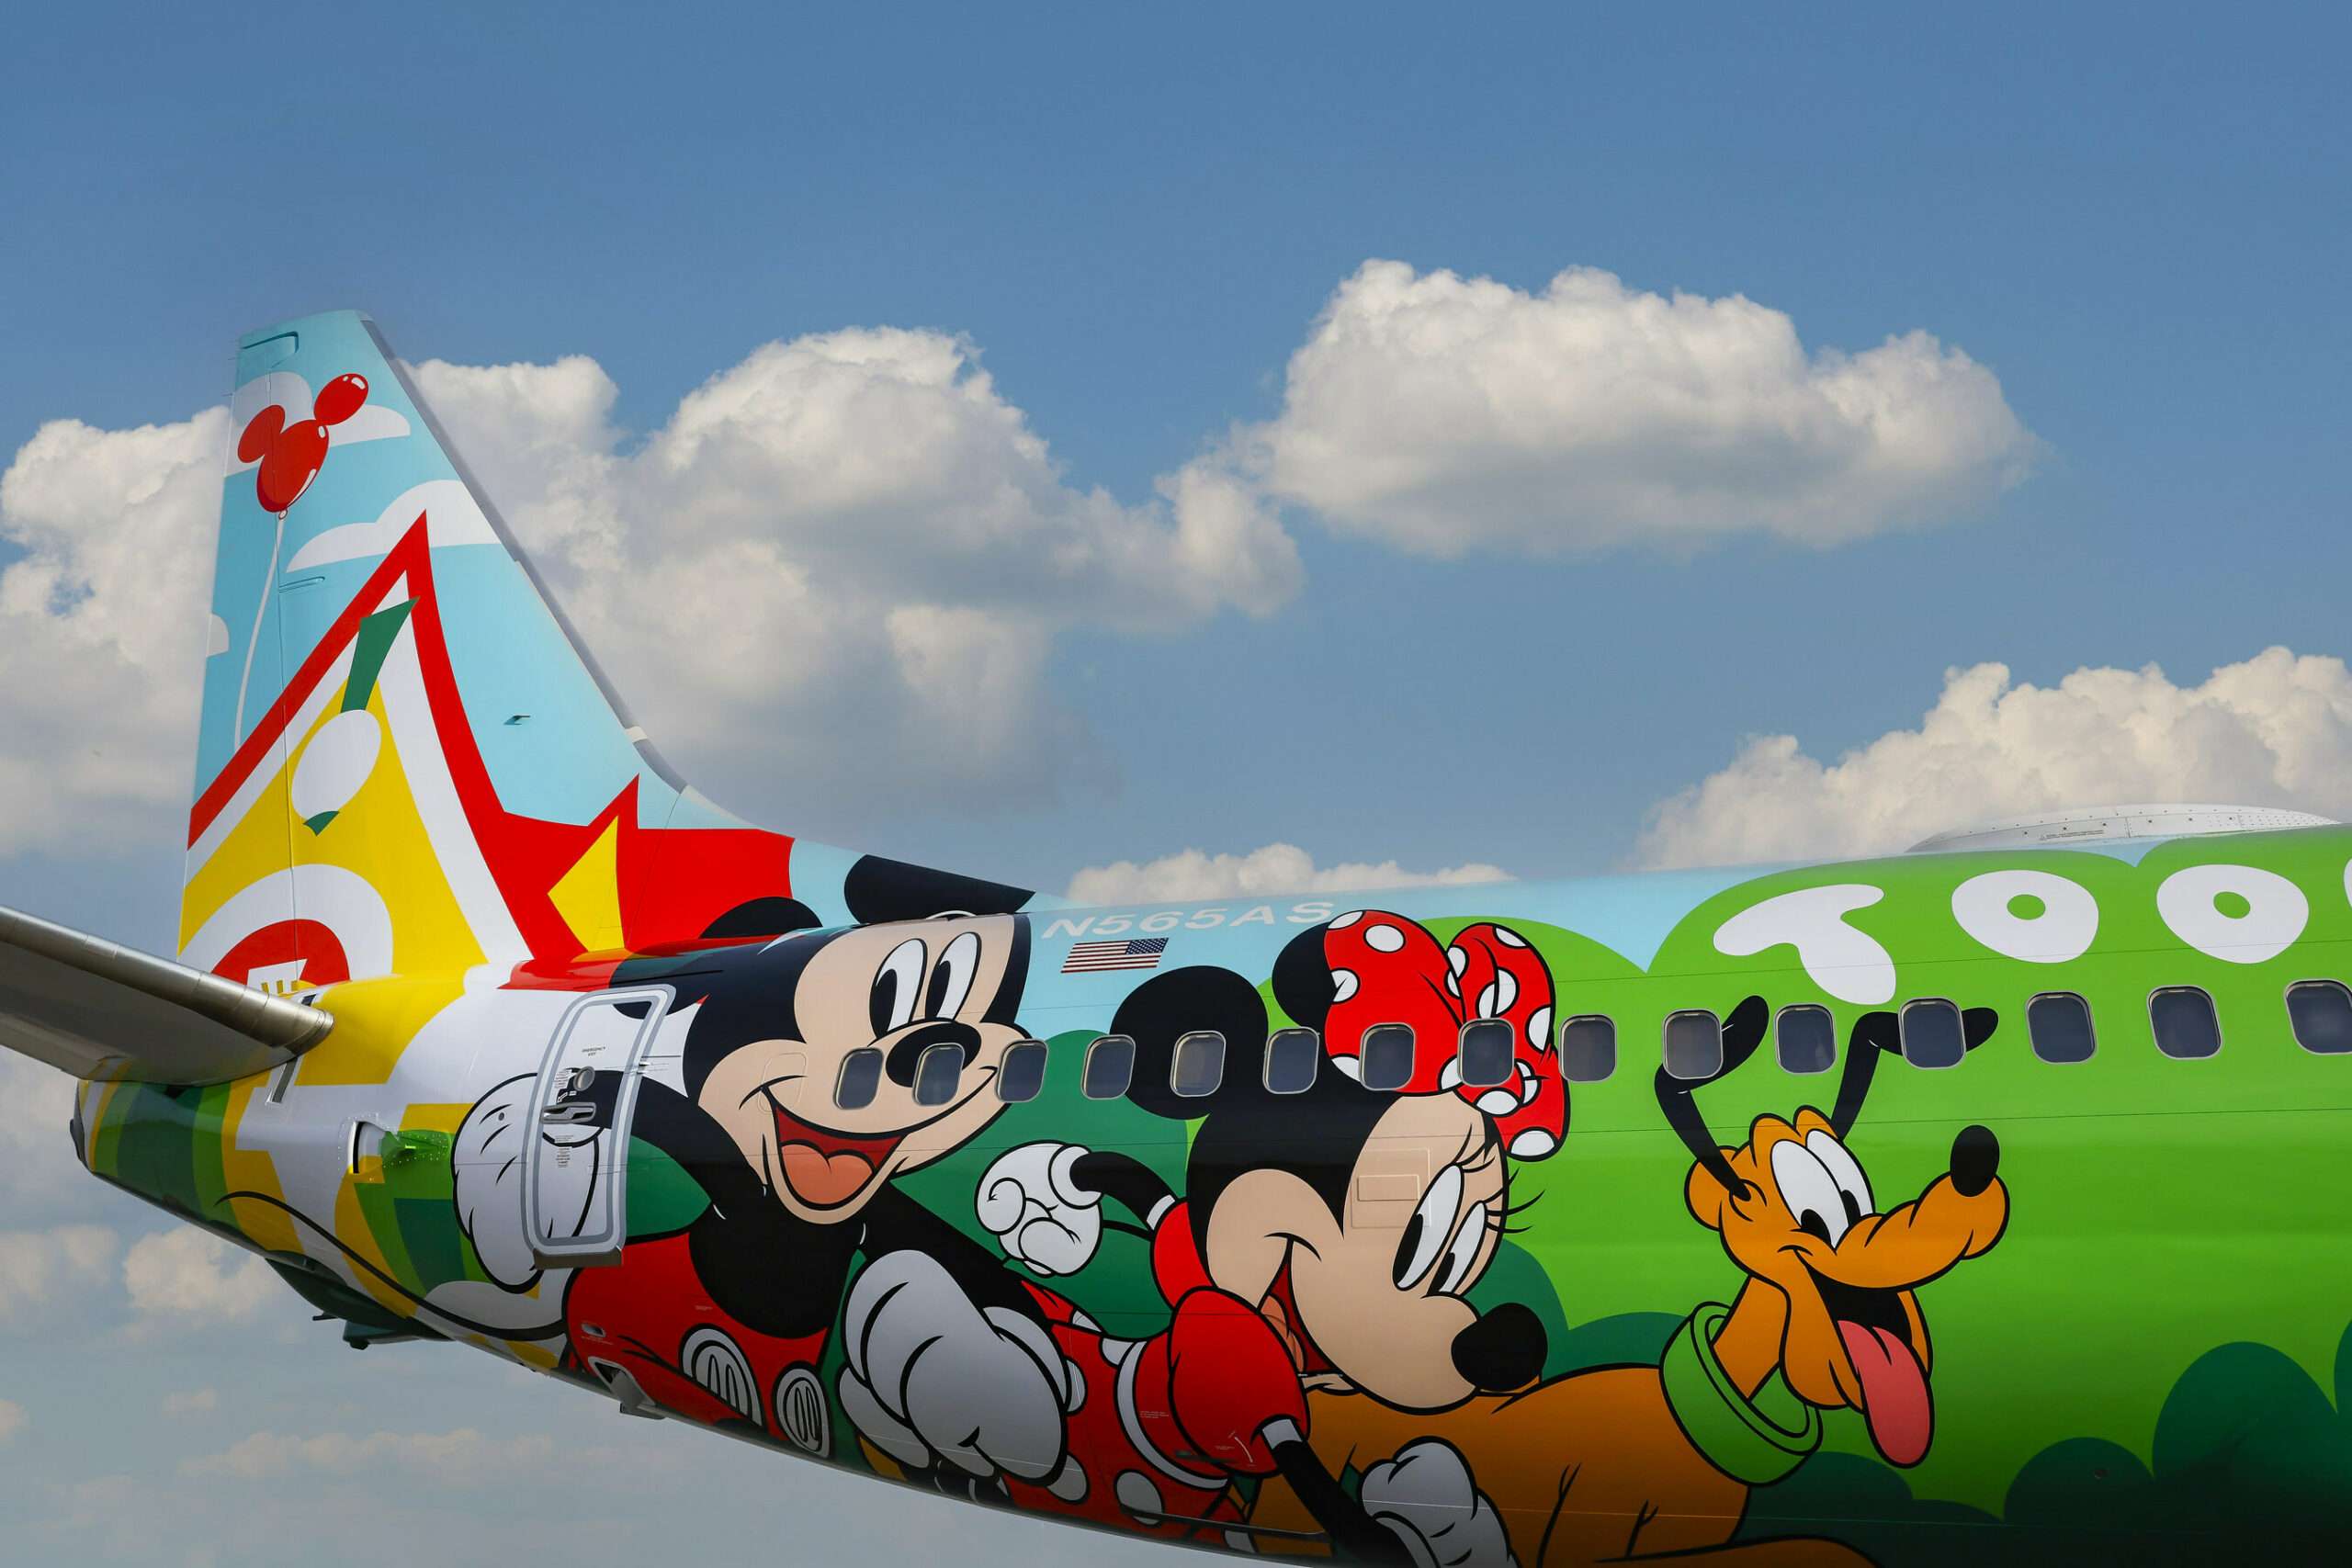 Alaska Airlines Paints 737 With New Disneyland-based Livery